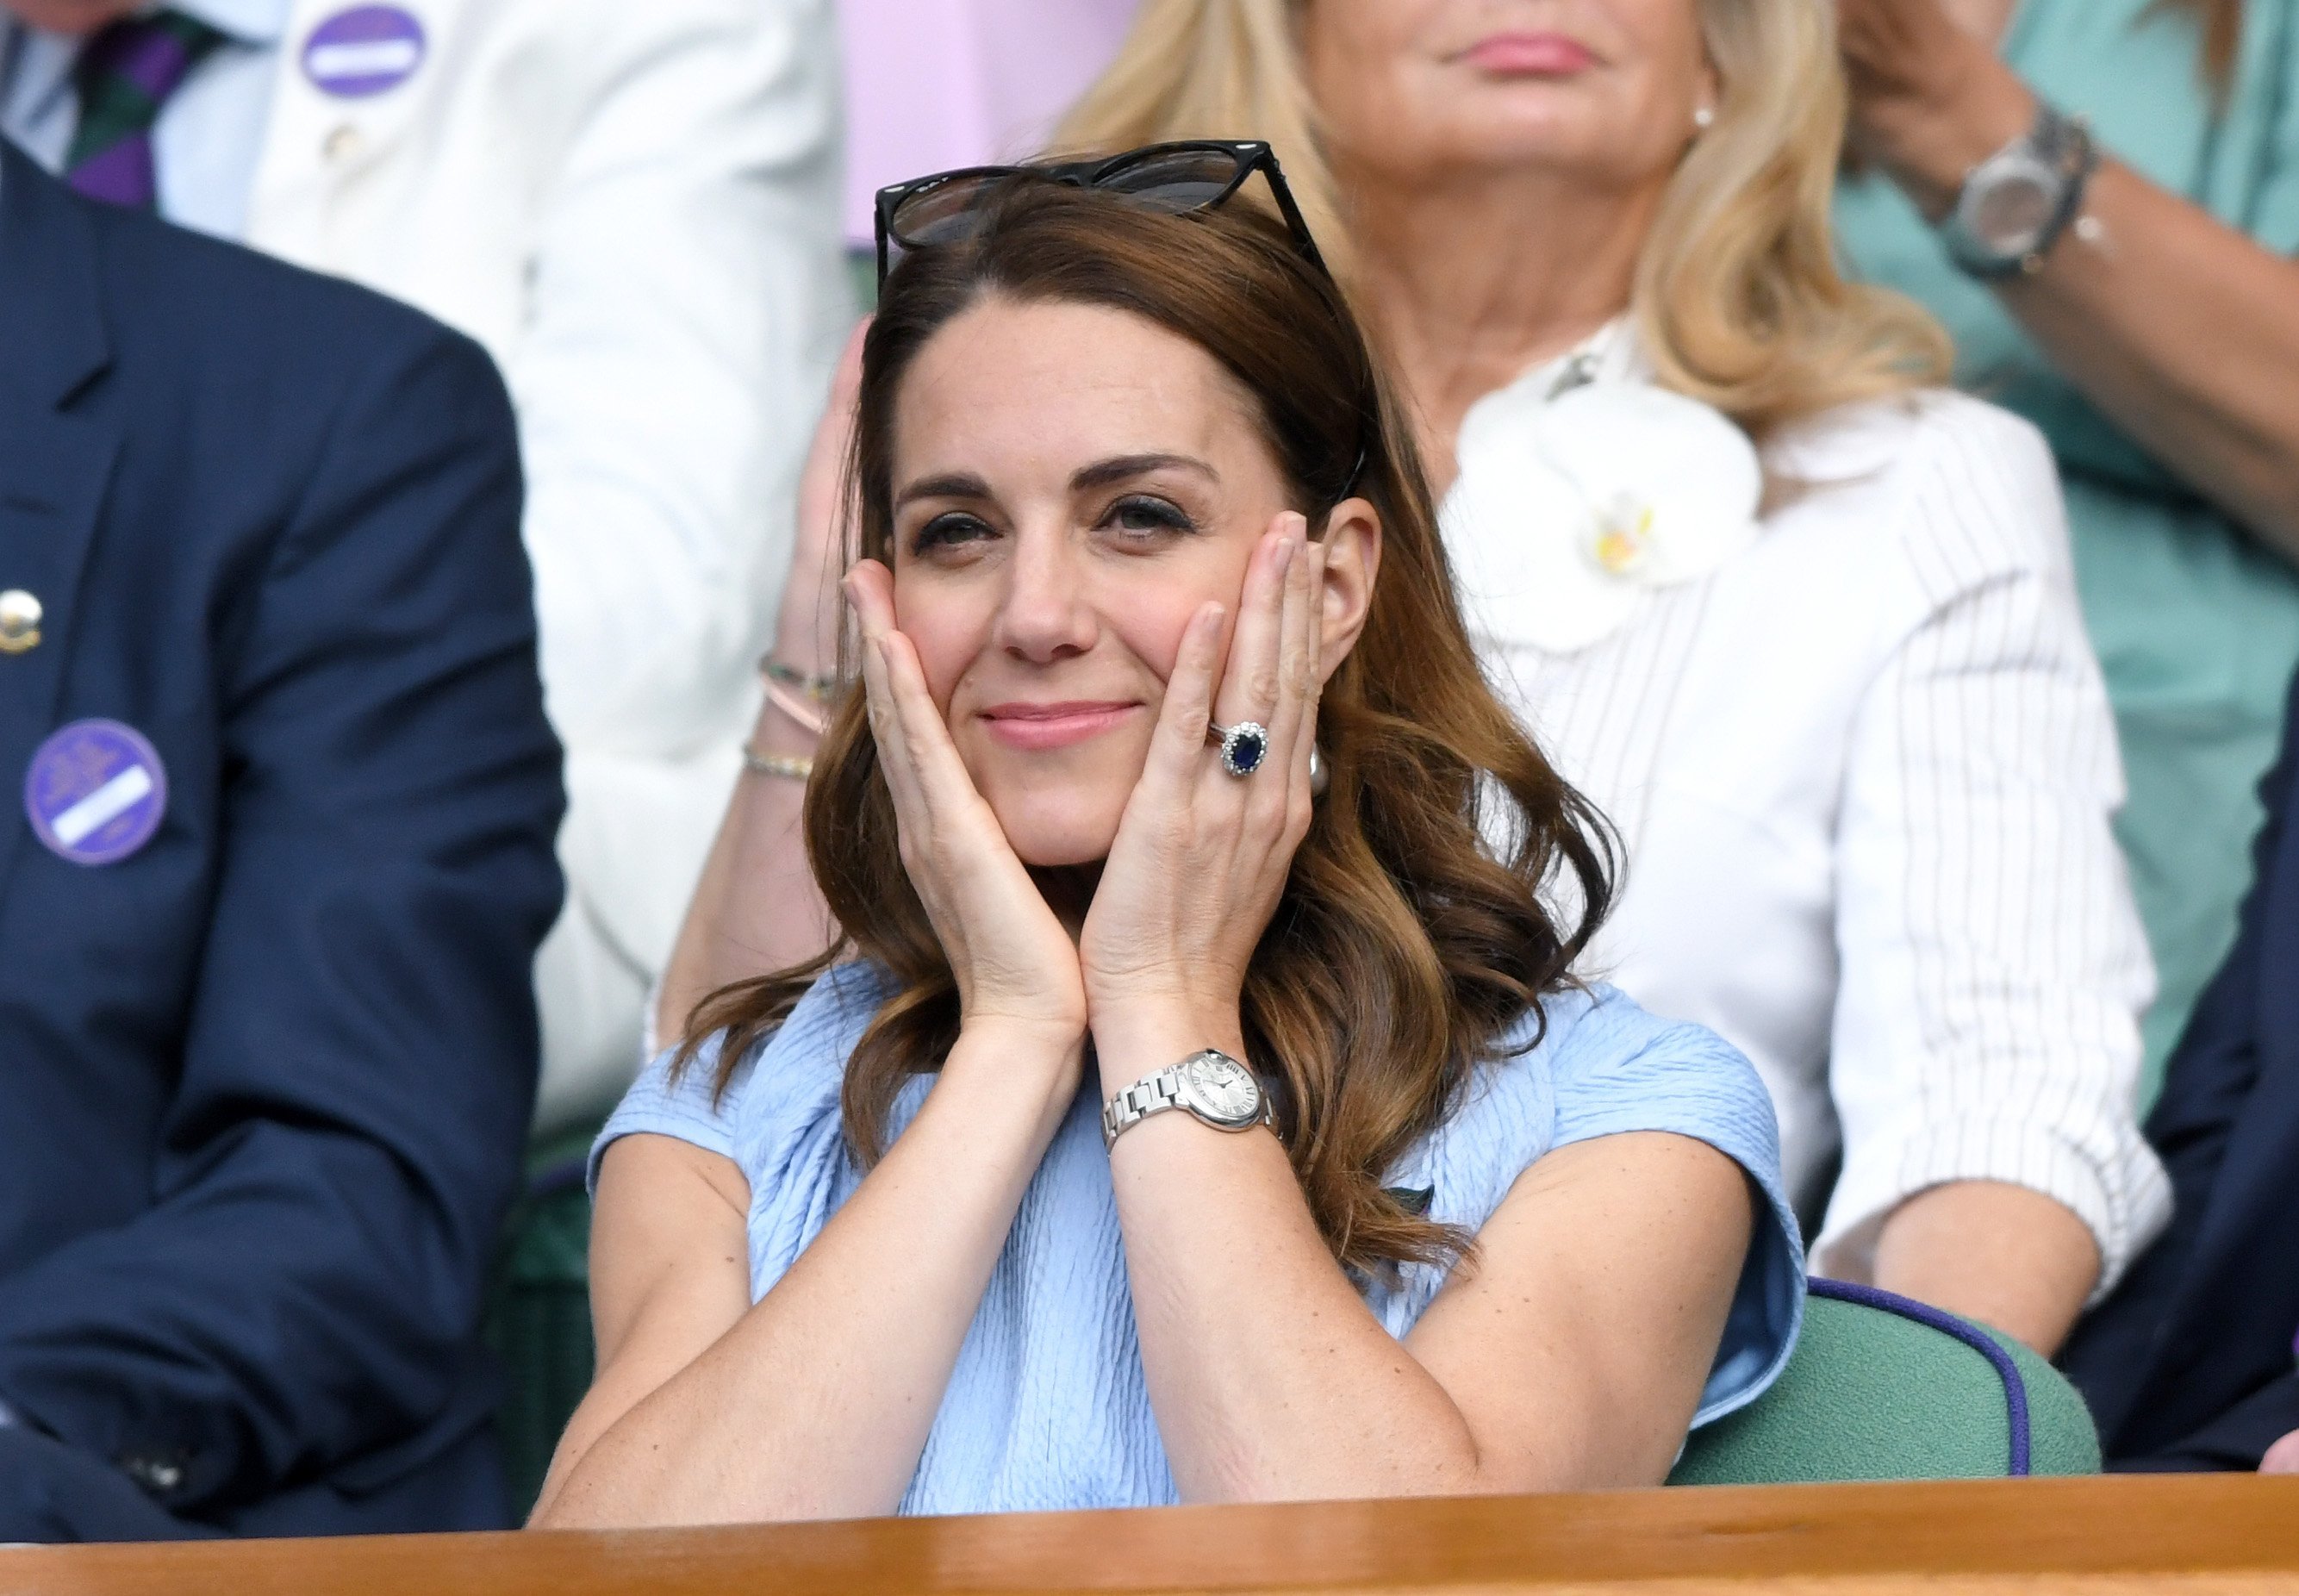 Duchess Kate reacting to the Men's Finals match at Wimbledon on July 14, 2019 | Photo: Getty Images